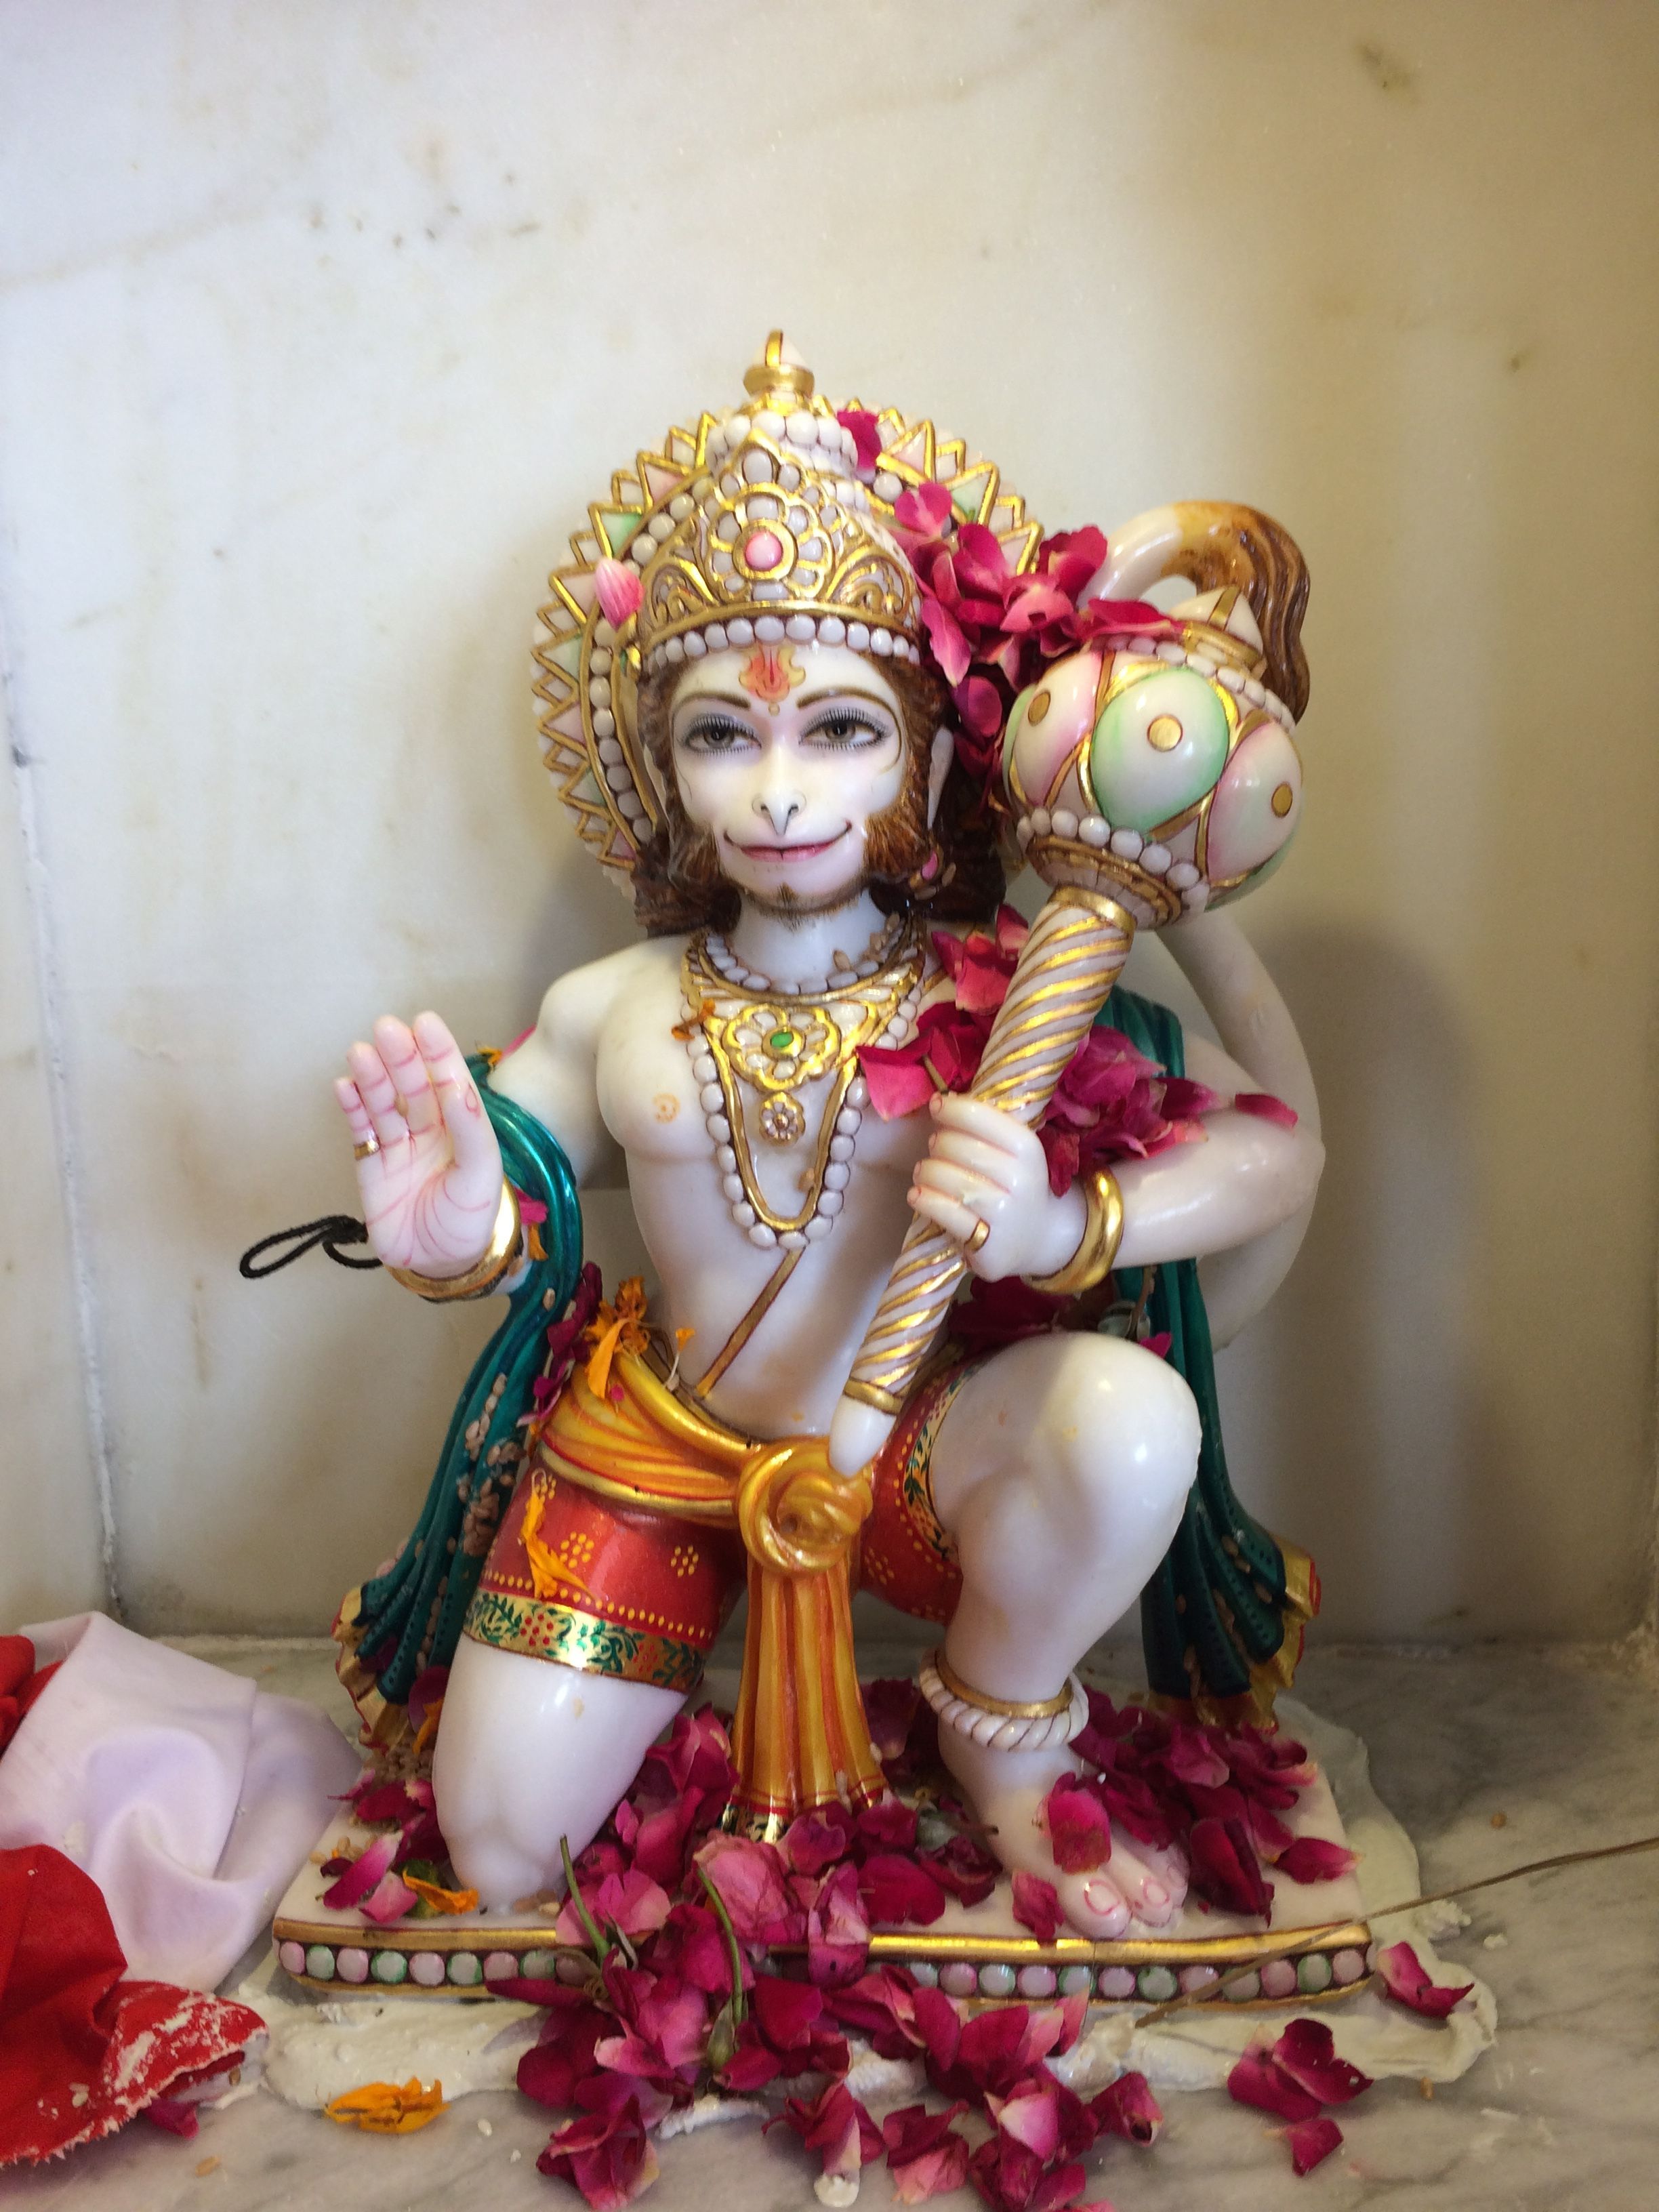 The Ultimate Collection of 999+ Bal Hanuman Images in Full 4K Quality